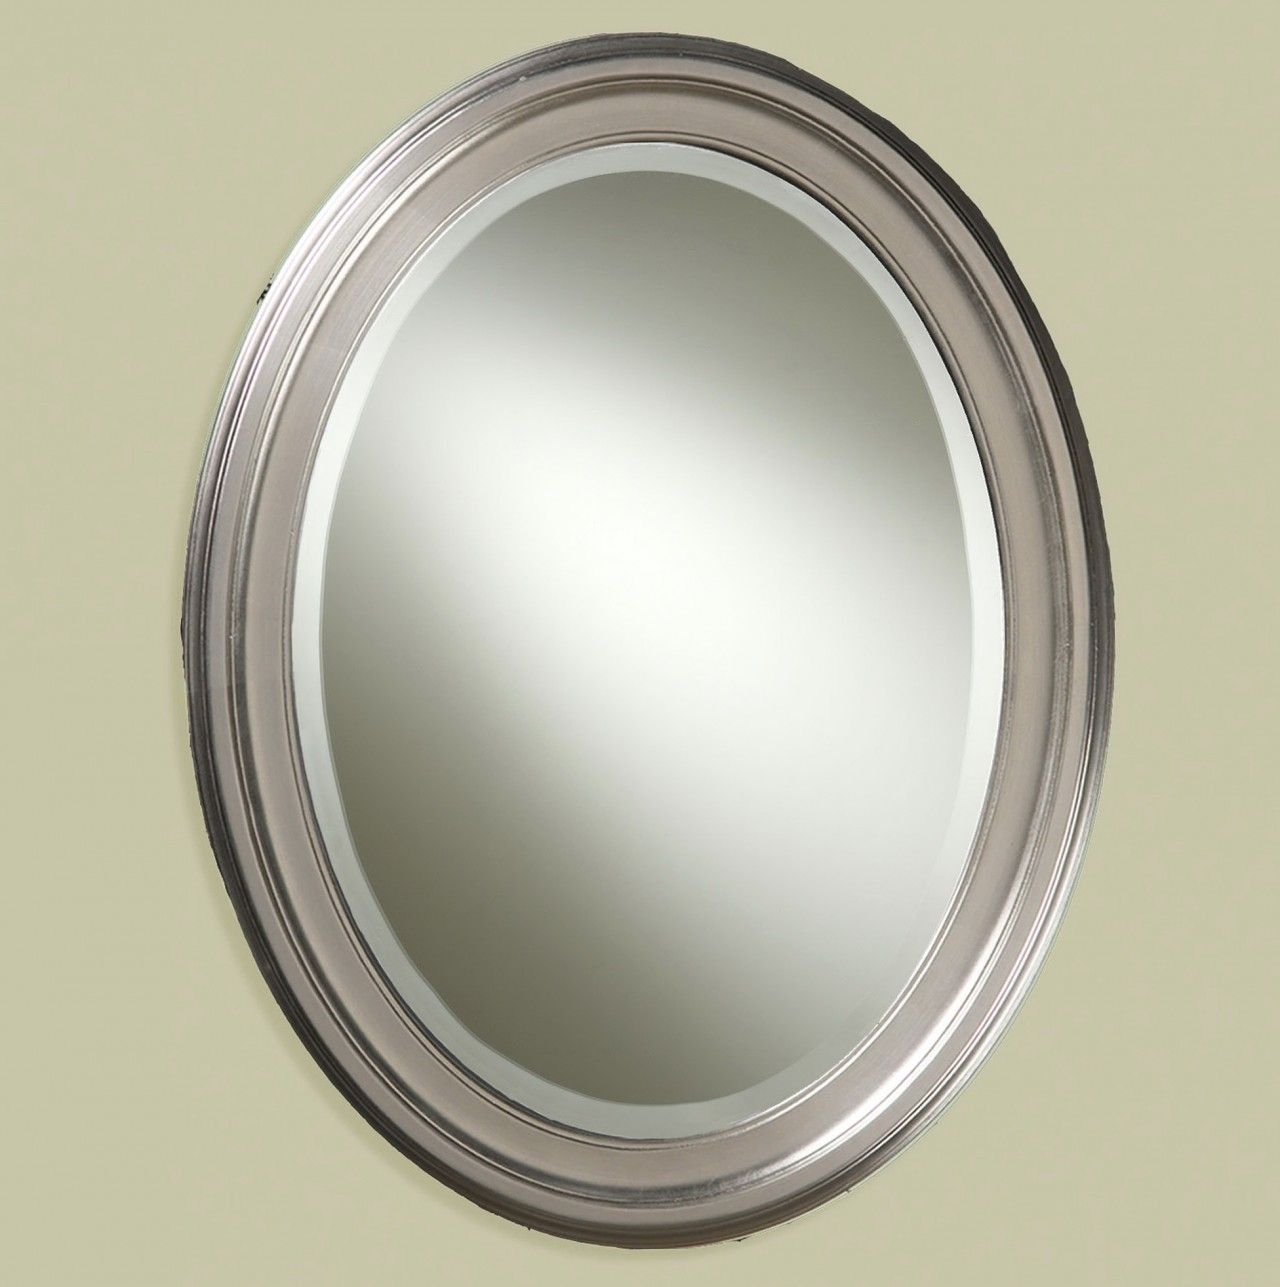 Oval Bathroom Mirrors Brushed Nickel | Home Design Ideas Throughout Polished Nickel Oval Wall Mirrors (View 13 of 15)